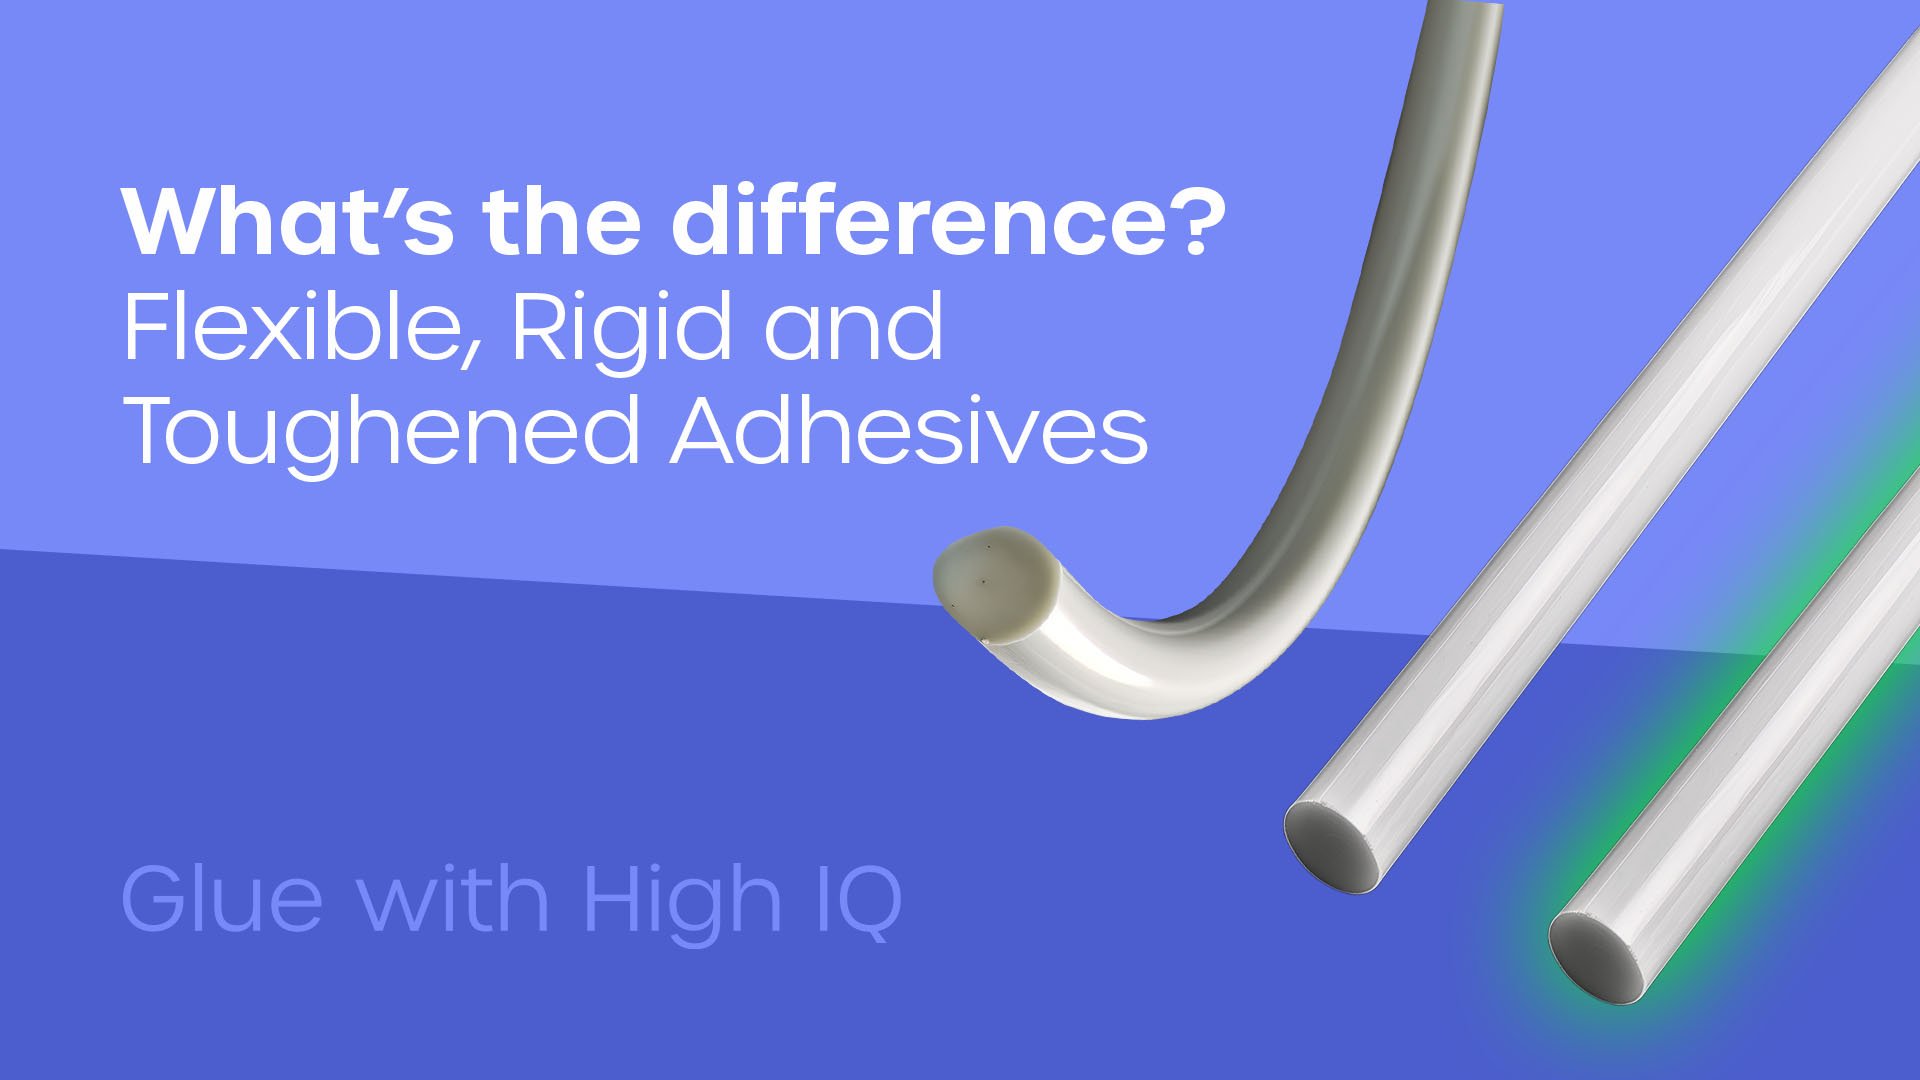 Are rigid or flexible adhesives better?